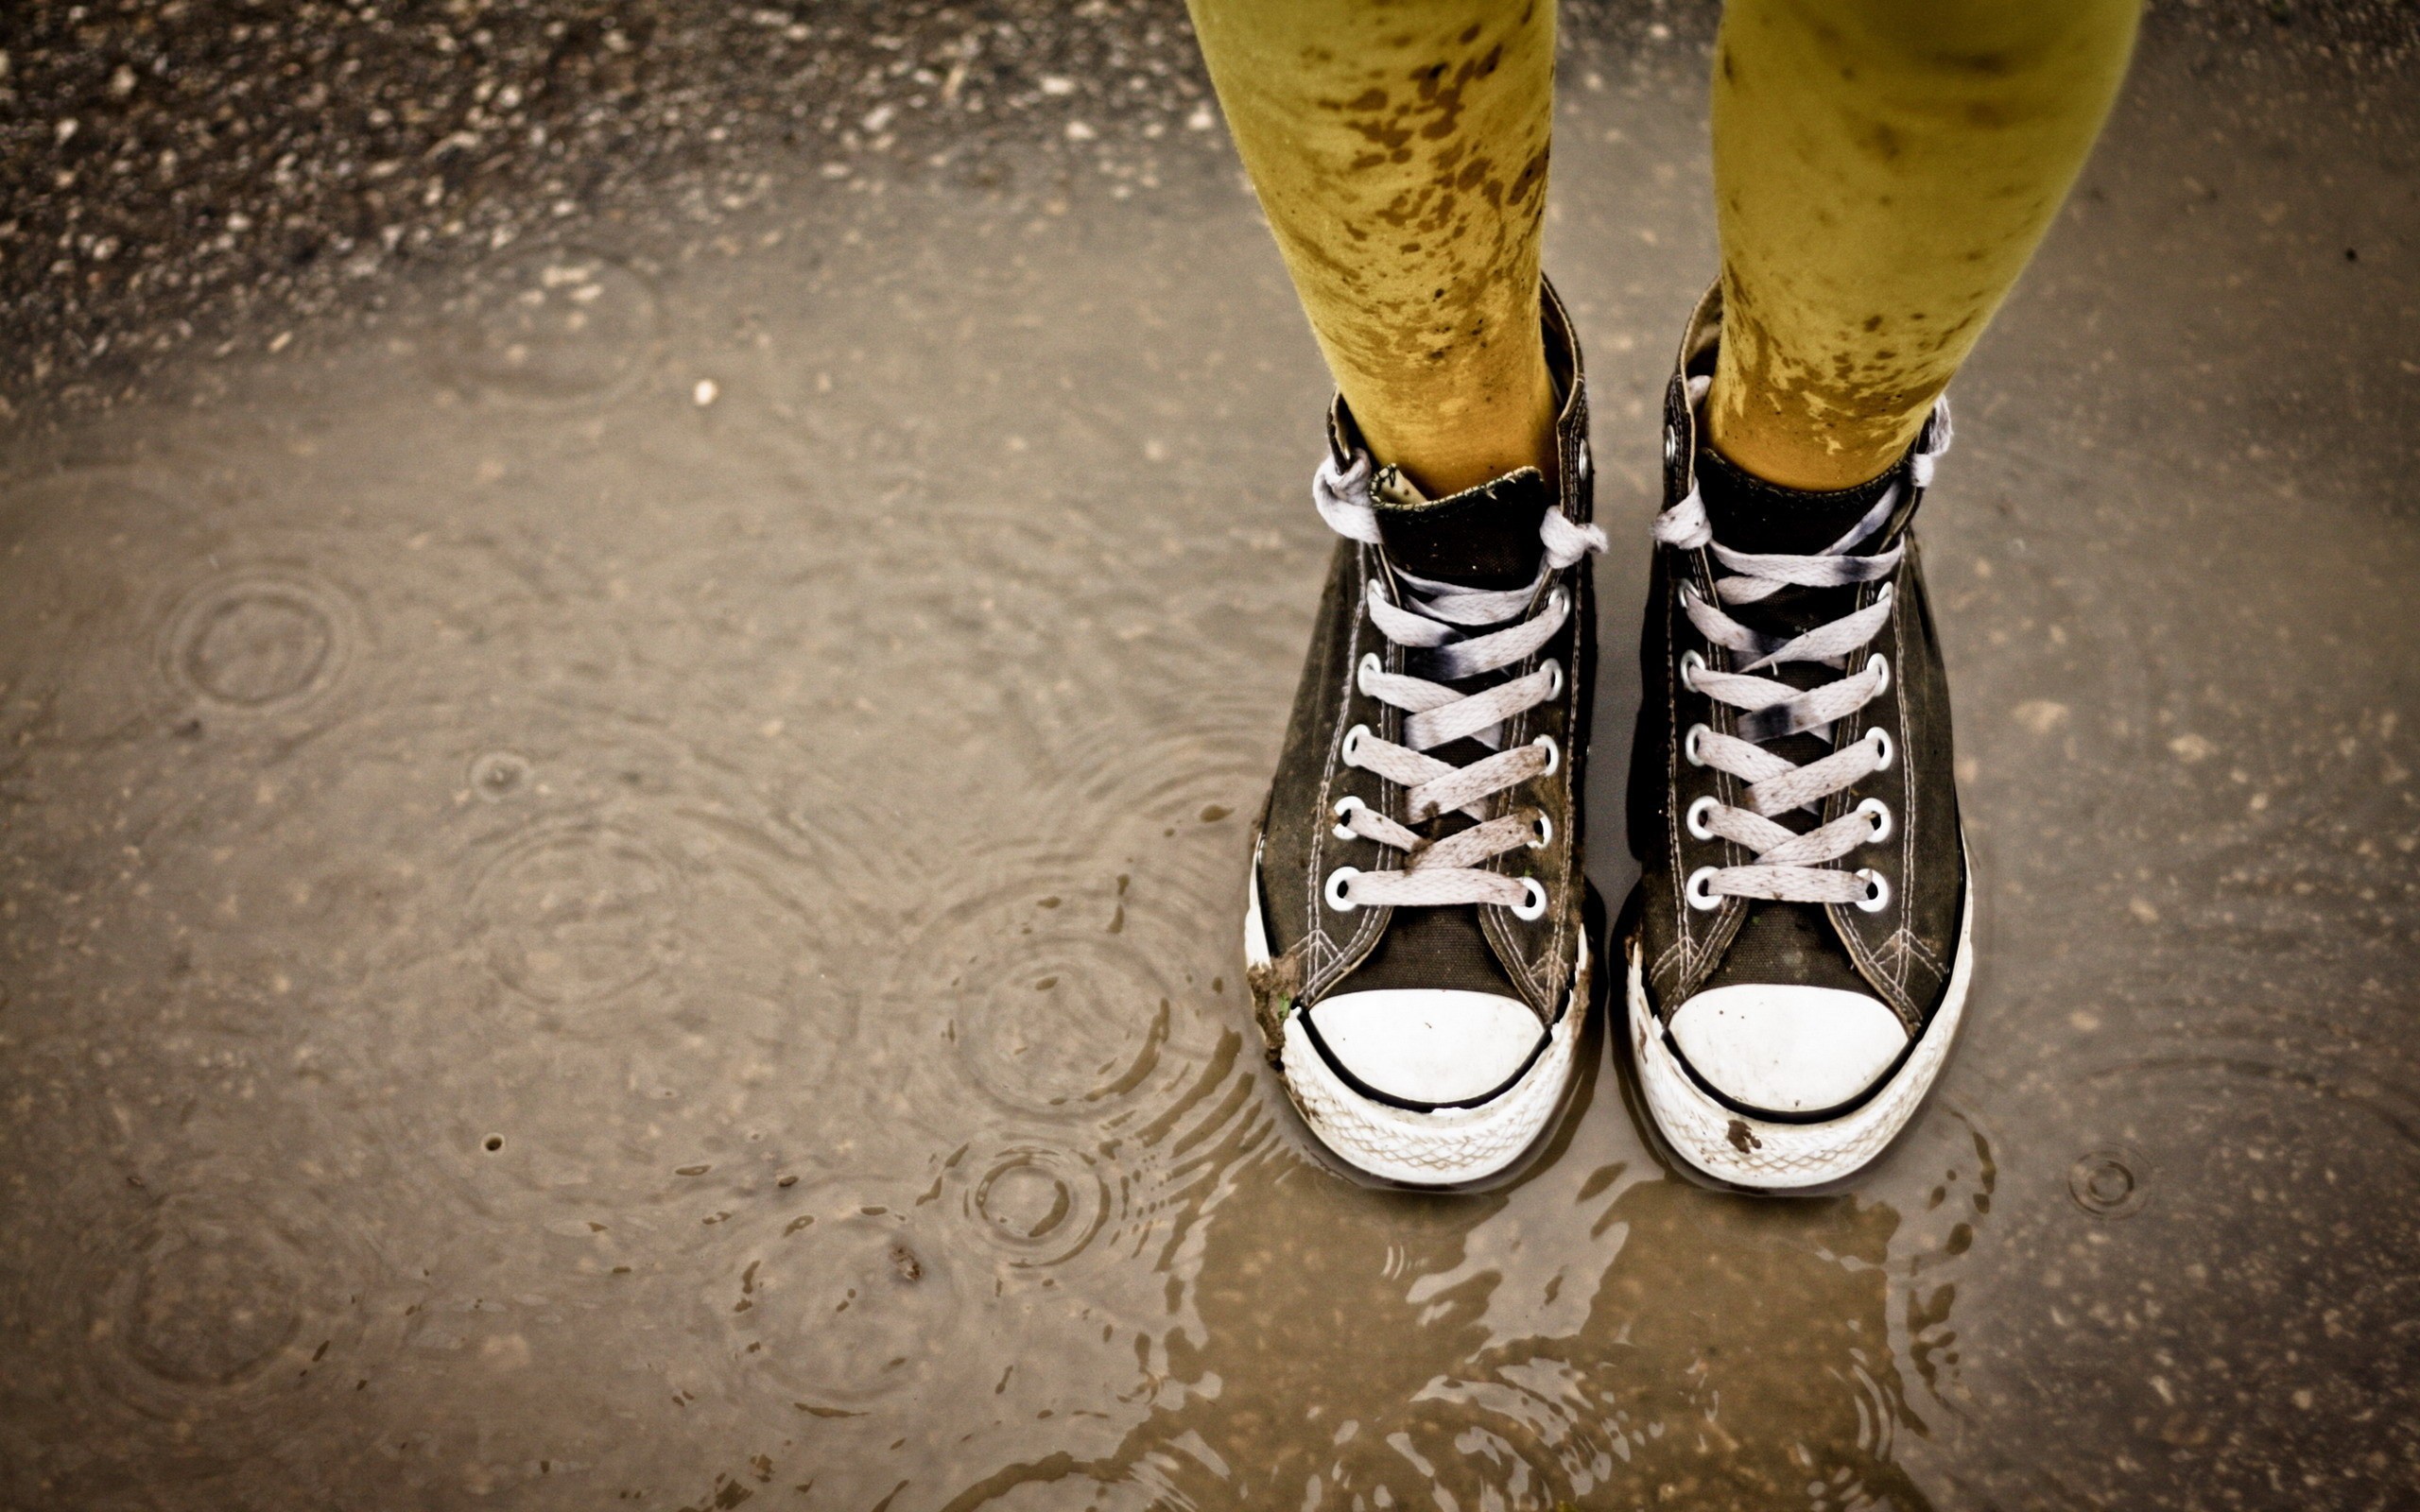 Converse Sneakers Shoe Puddle Product 2560x1600